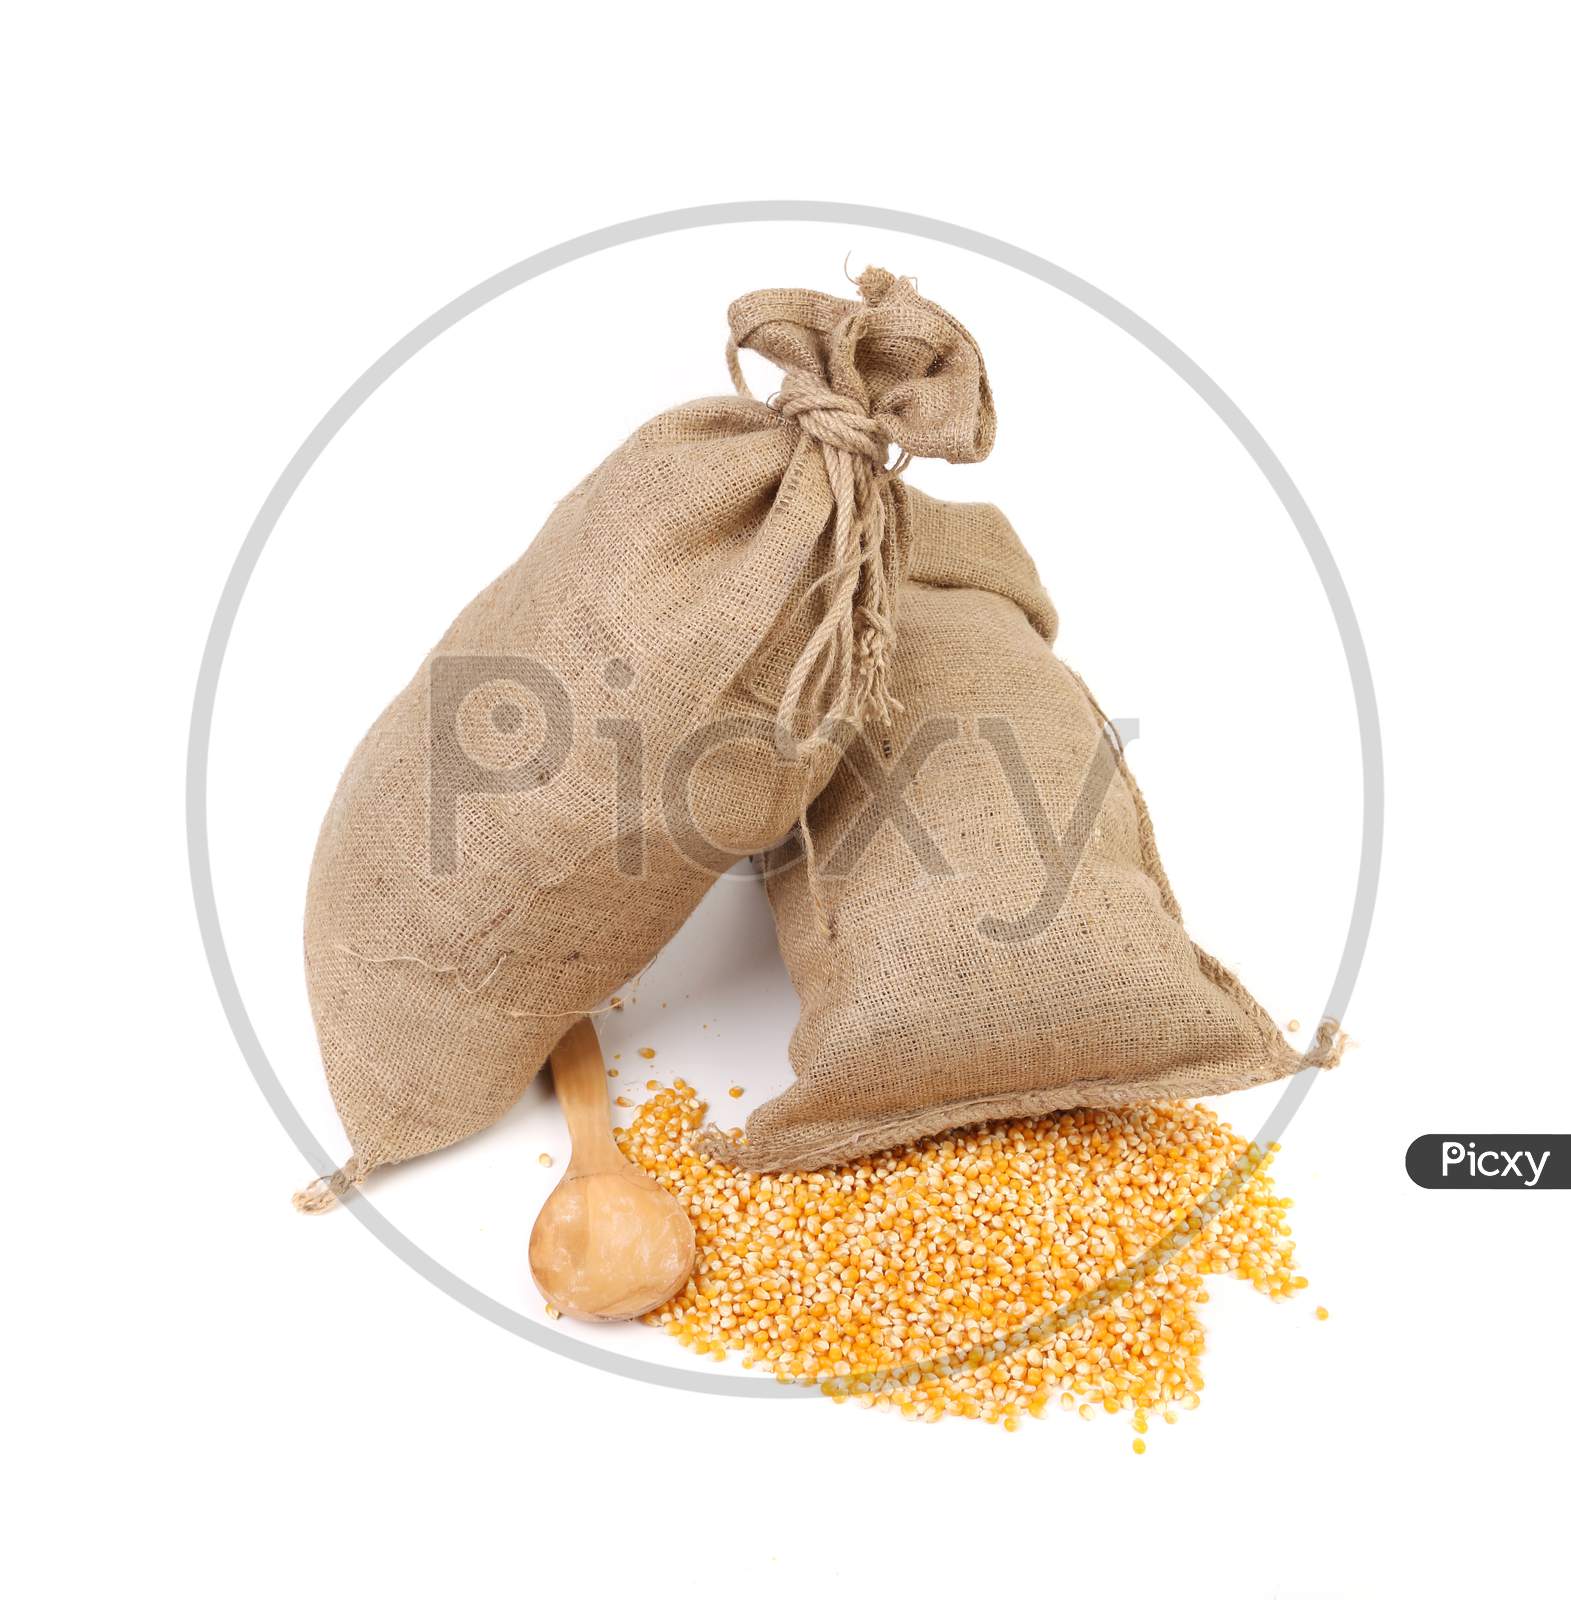 Two Sacks With Corn Grains. Isolated On A White Background.